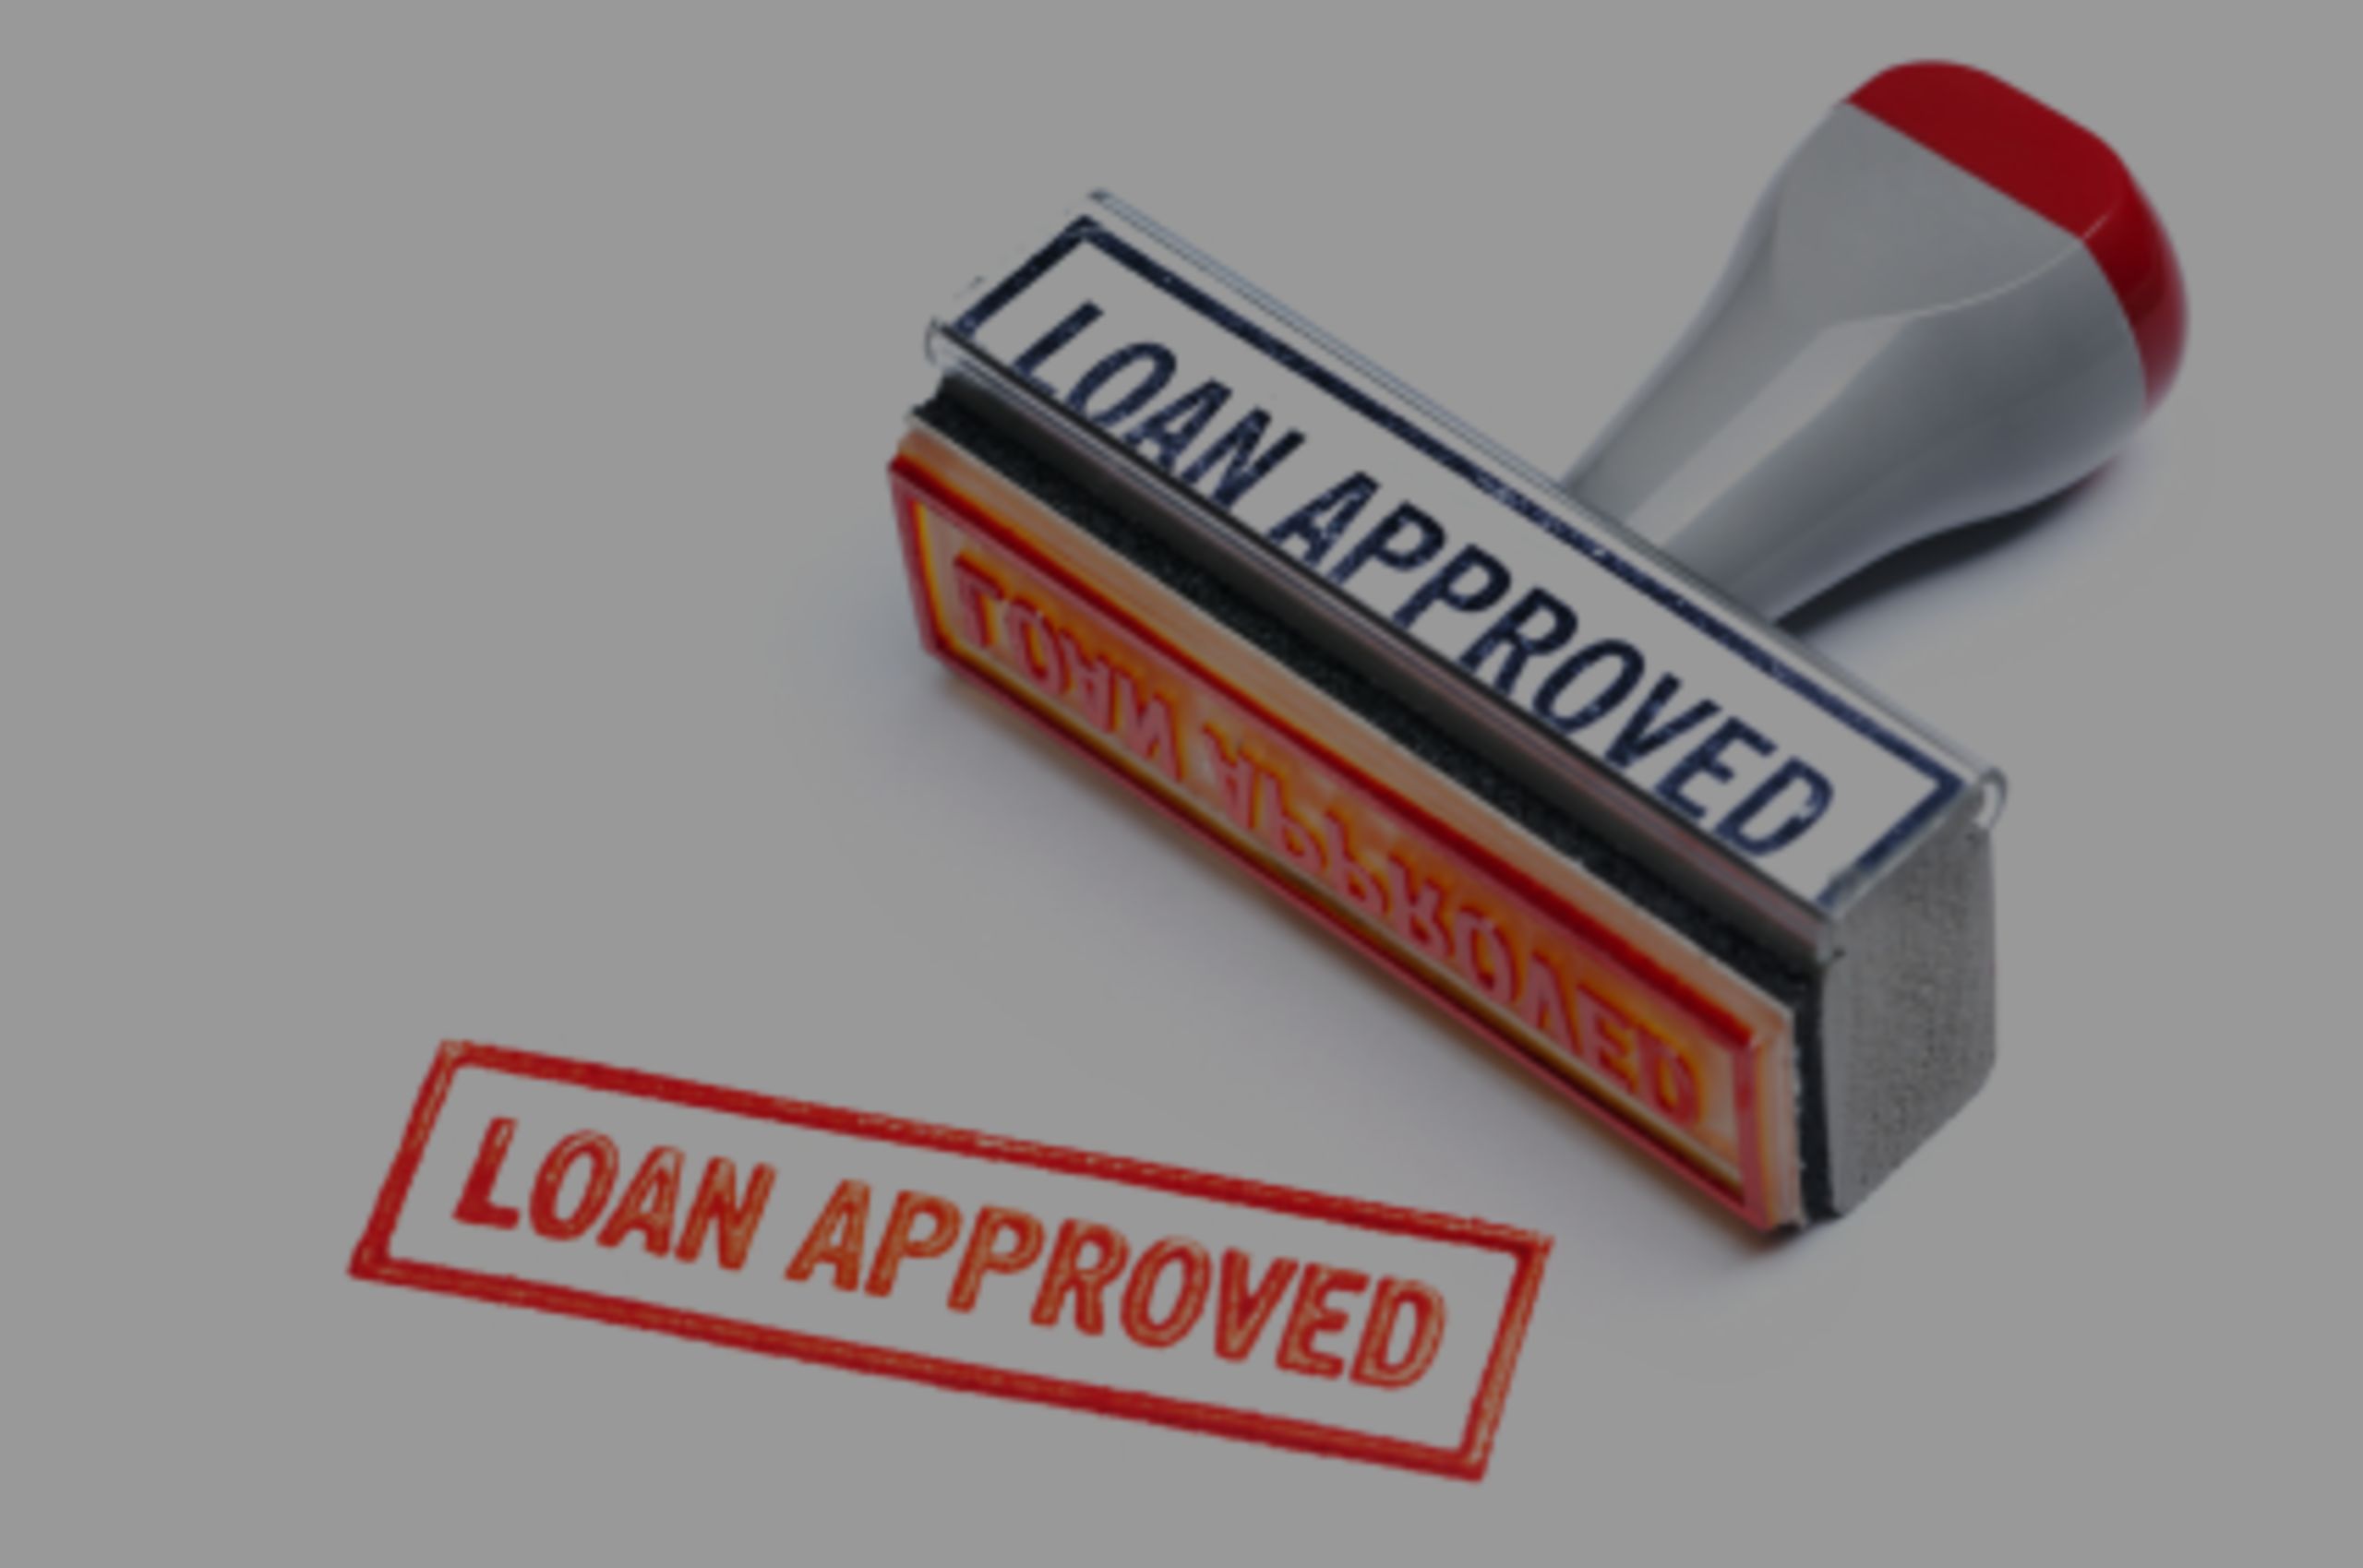 Private lenders offer new opportunities and risks